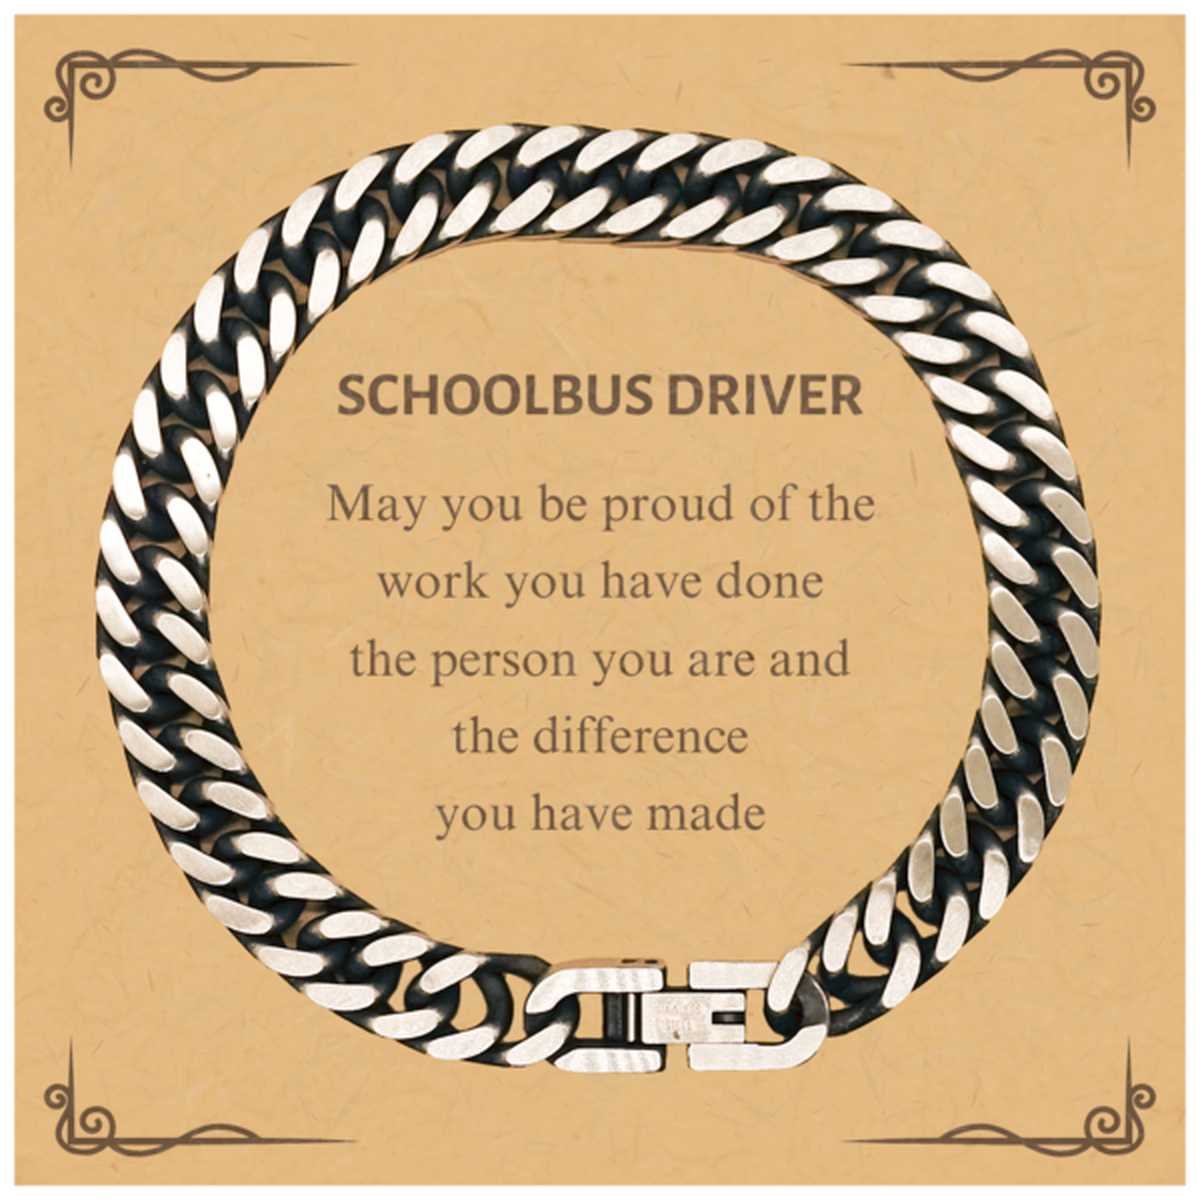 Schoolbus Driver May you be proud of the work you have done, Retirement Schoolbus Driver Cuban Link Chain Bracelet for Colleague Appreciation Gifts Amazing for Schoolbus Driver